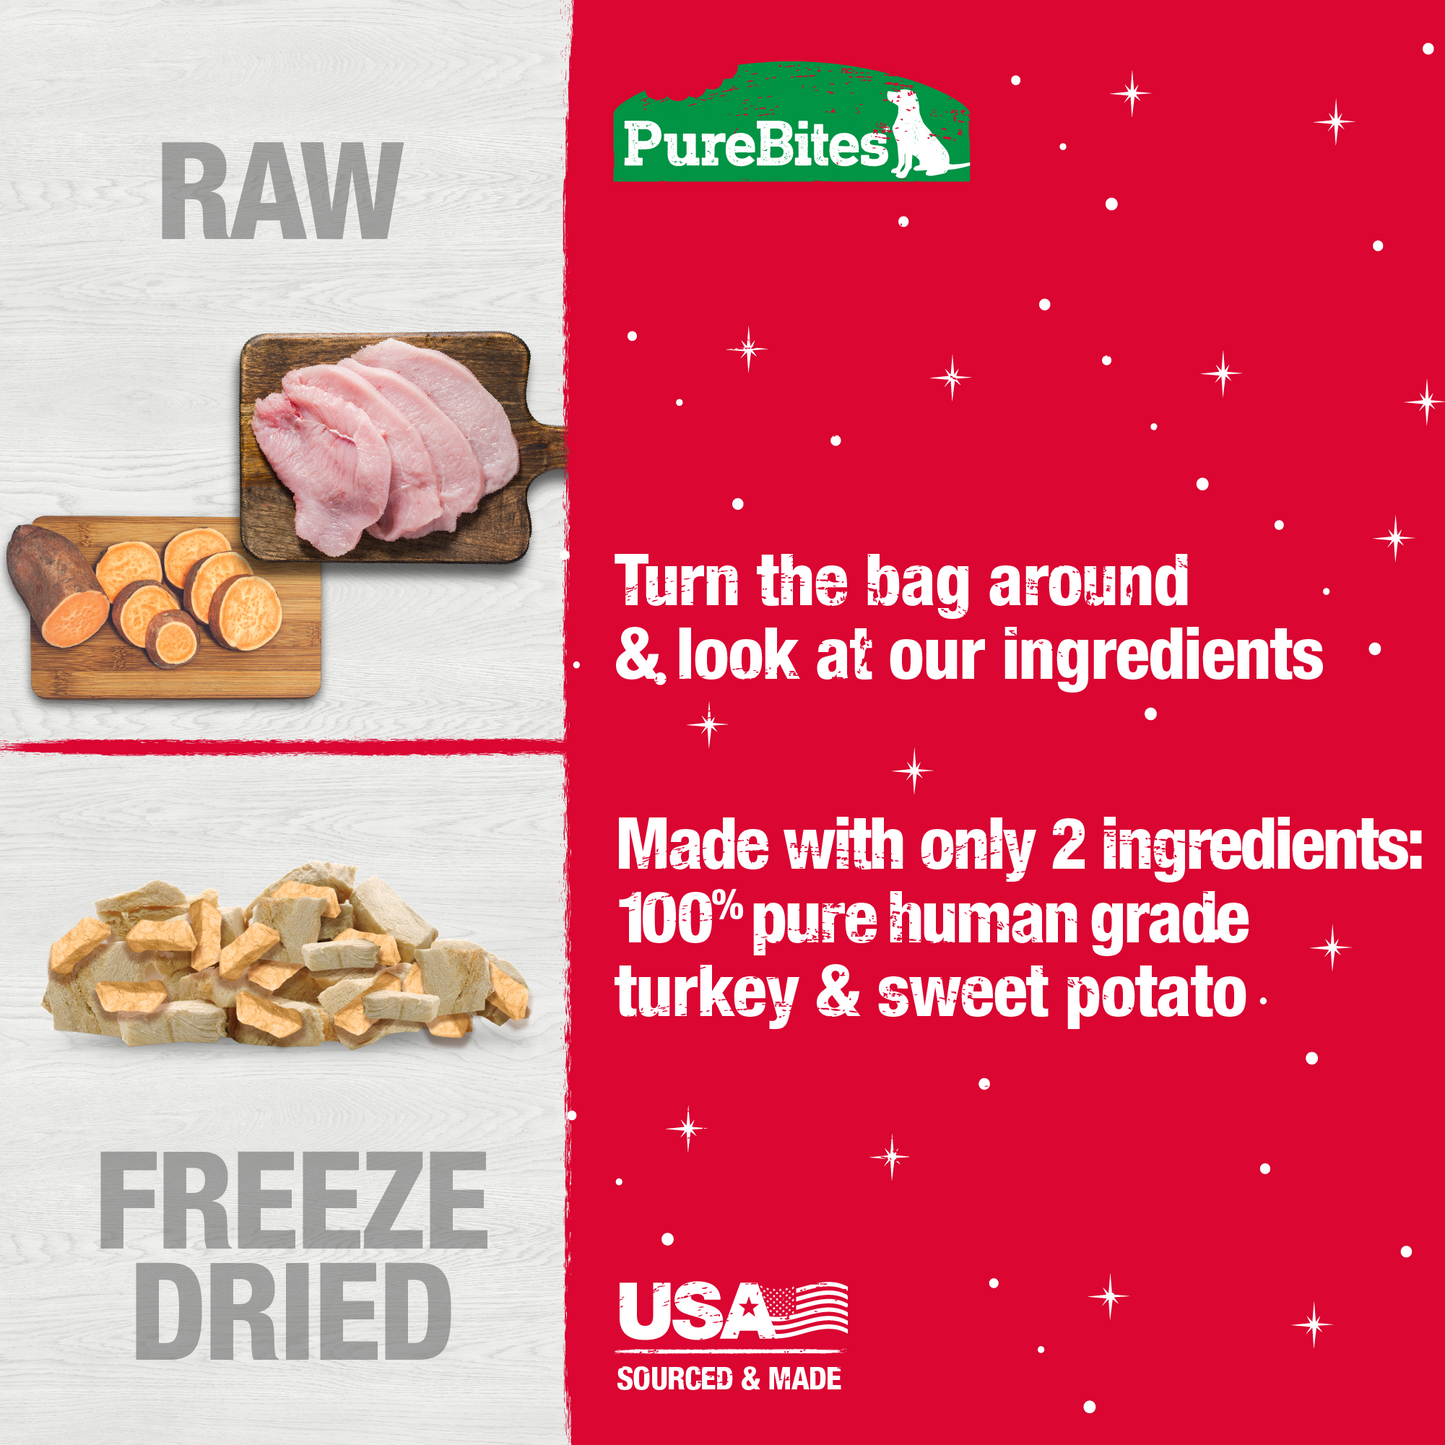 Made with only 1 Ingredient you can read, pronounce, and trust: USA sourced human grade turkey & sweet potato.